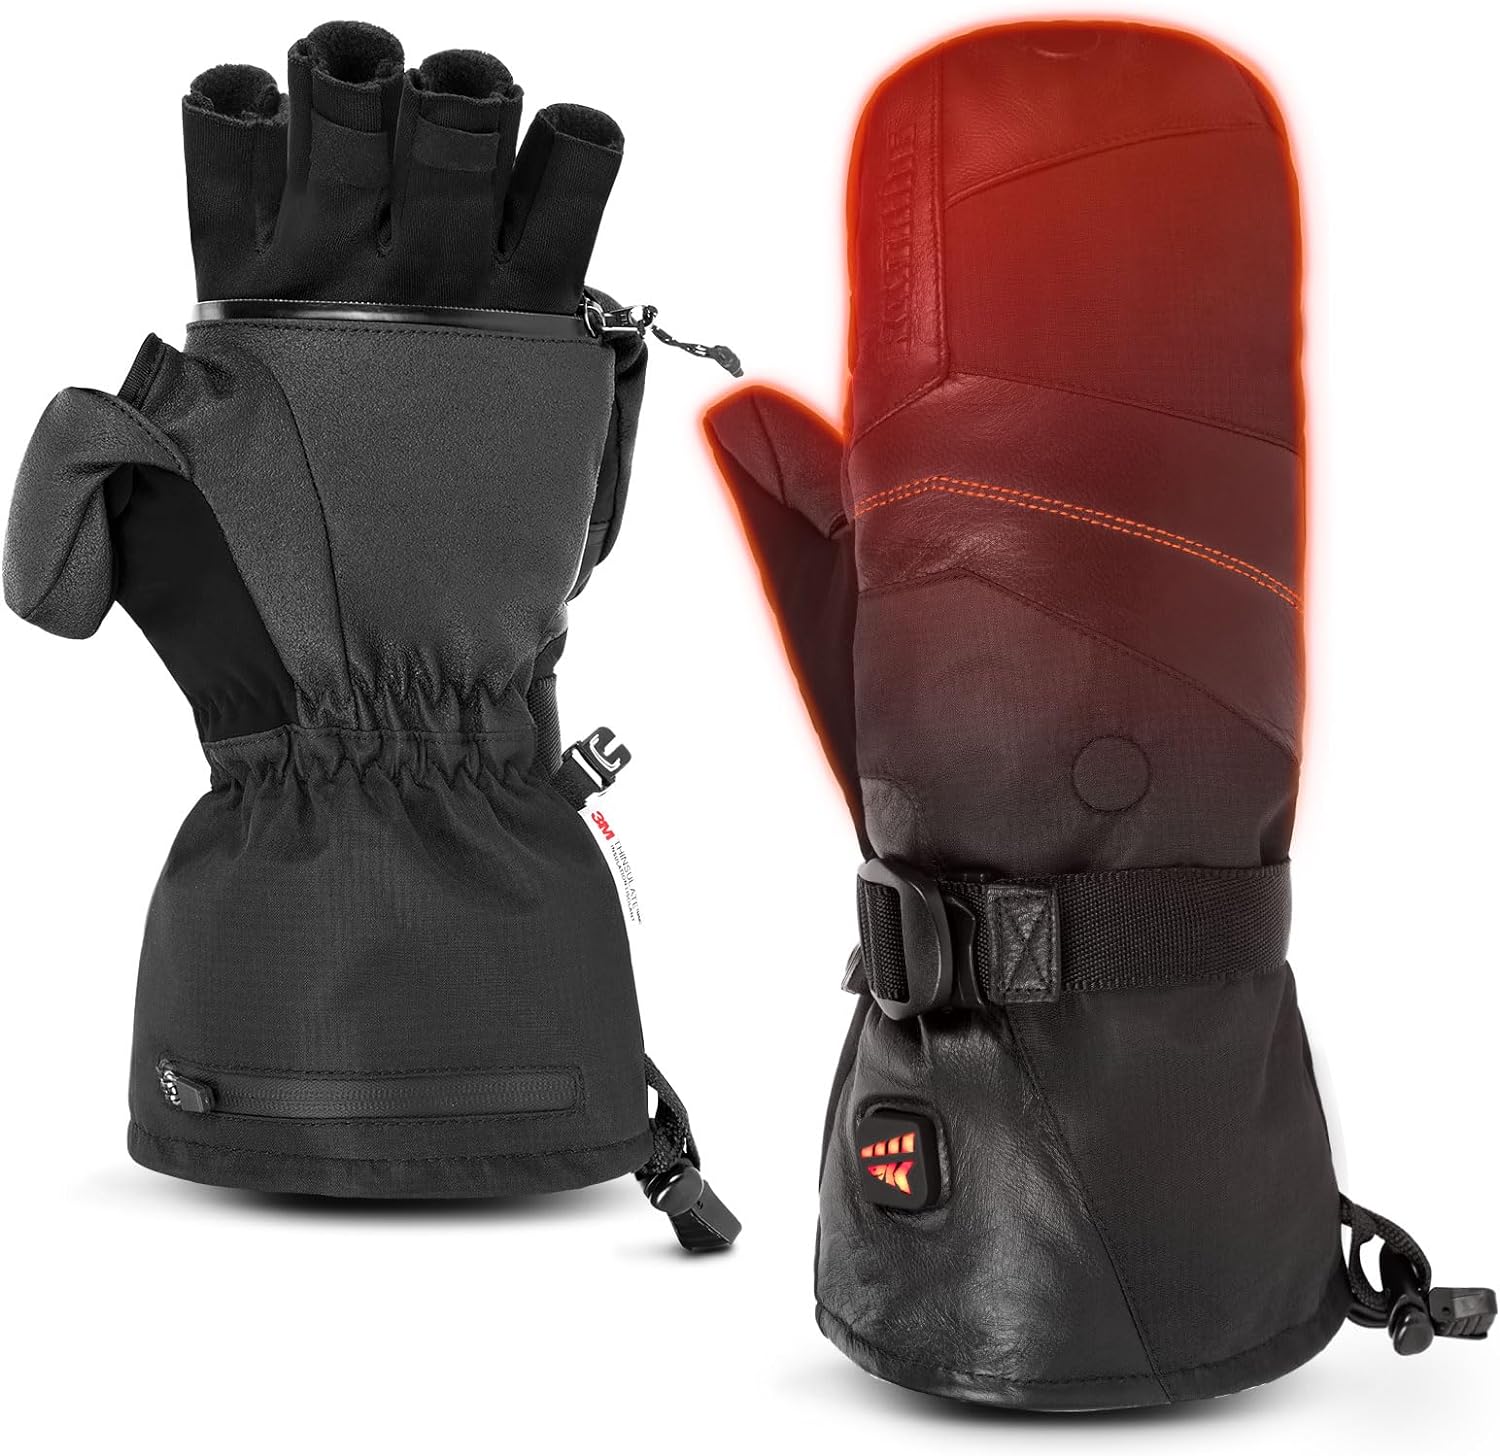 Check Out the Deals: KastKing Calido Heated Mitten - Rechargeable Gloves for Men